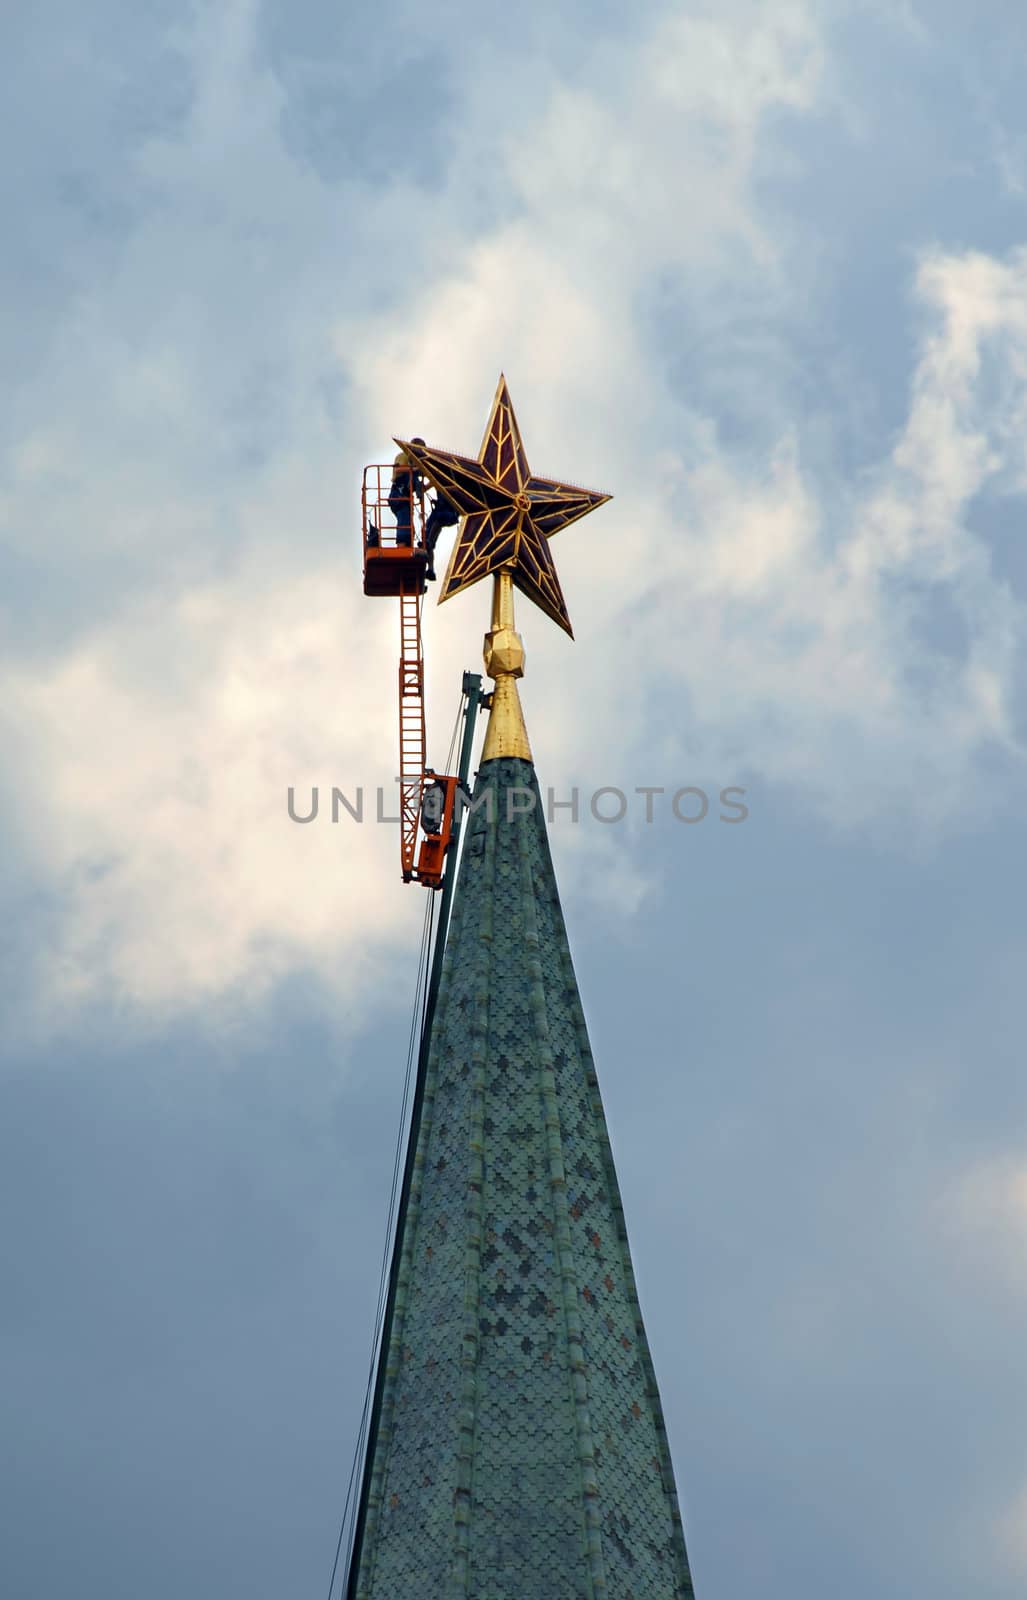 workers repairing the Kremlin tower star in Moscow, Russia